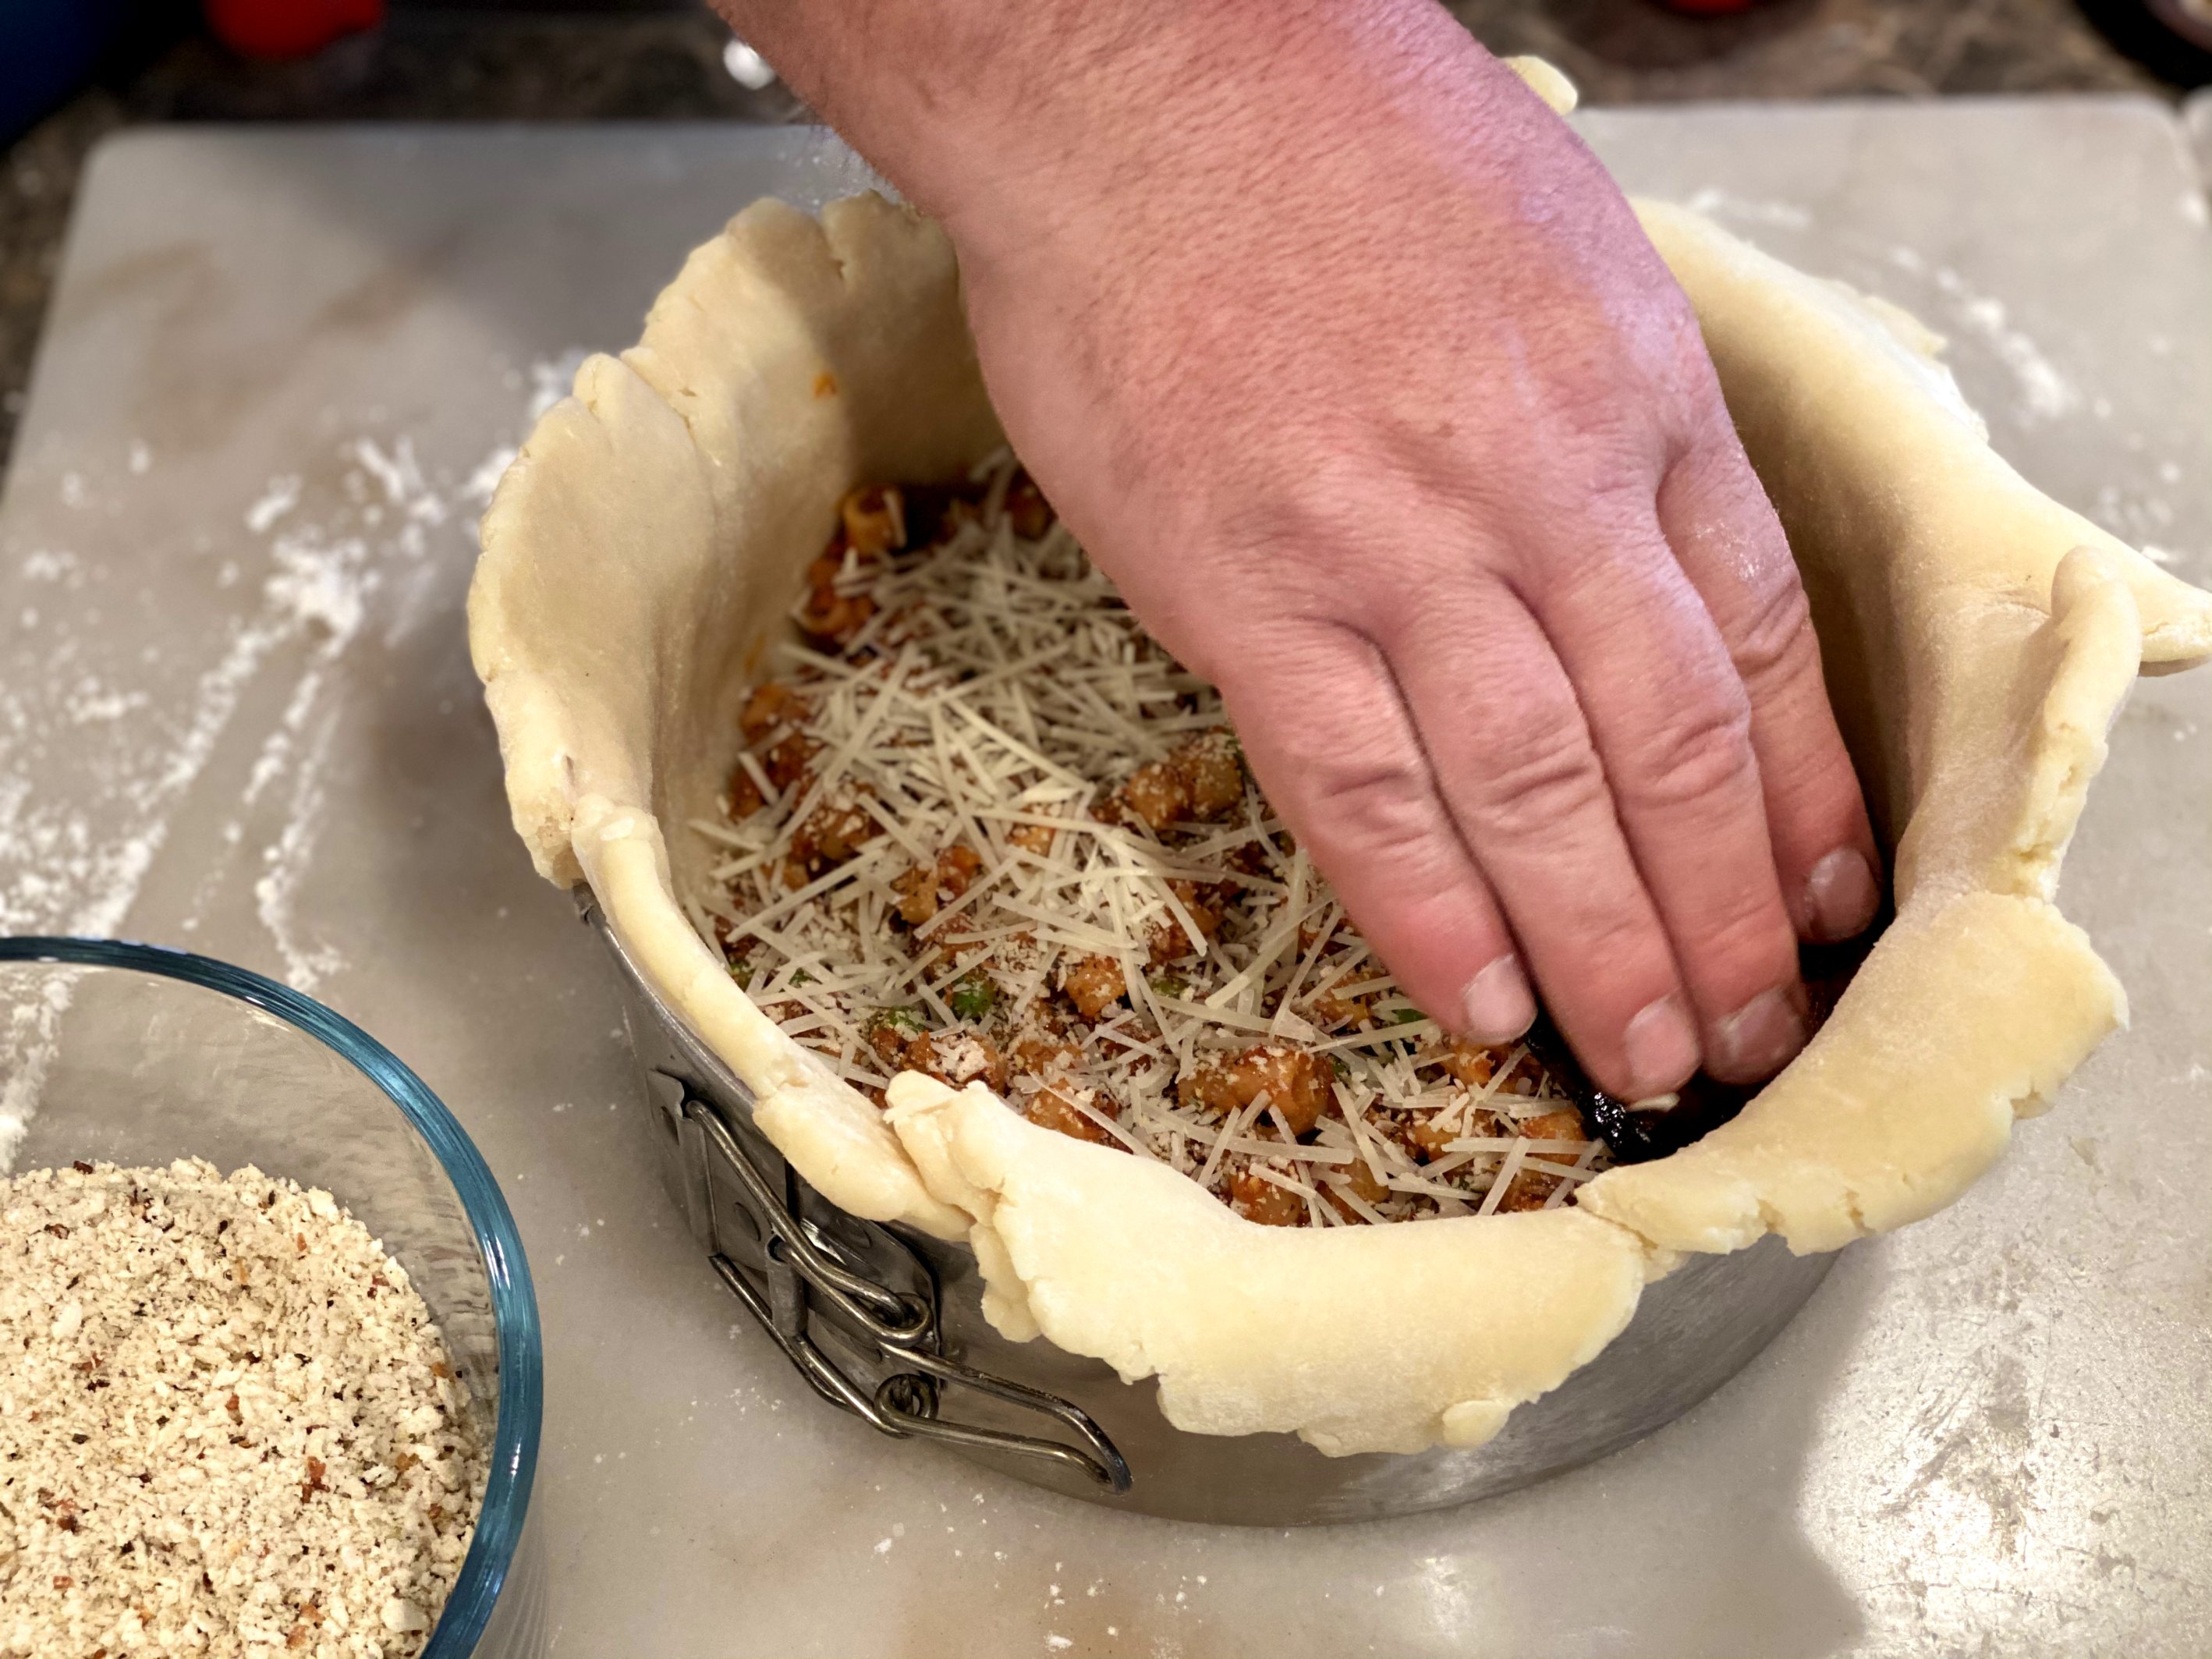 Adding layers of parmesan cheese to the timballo.